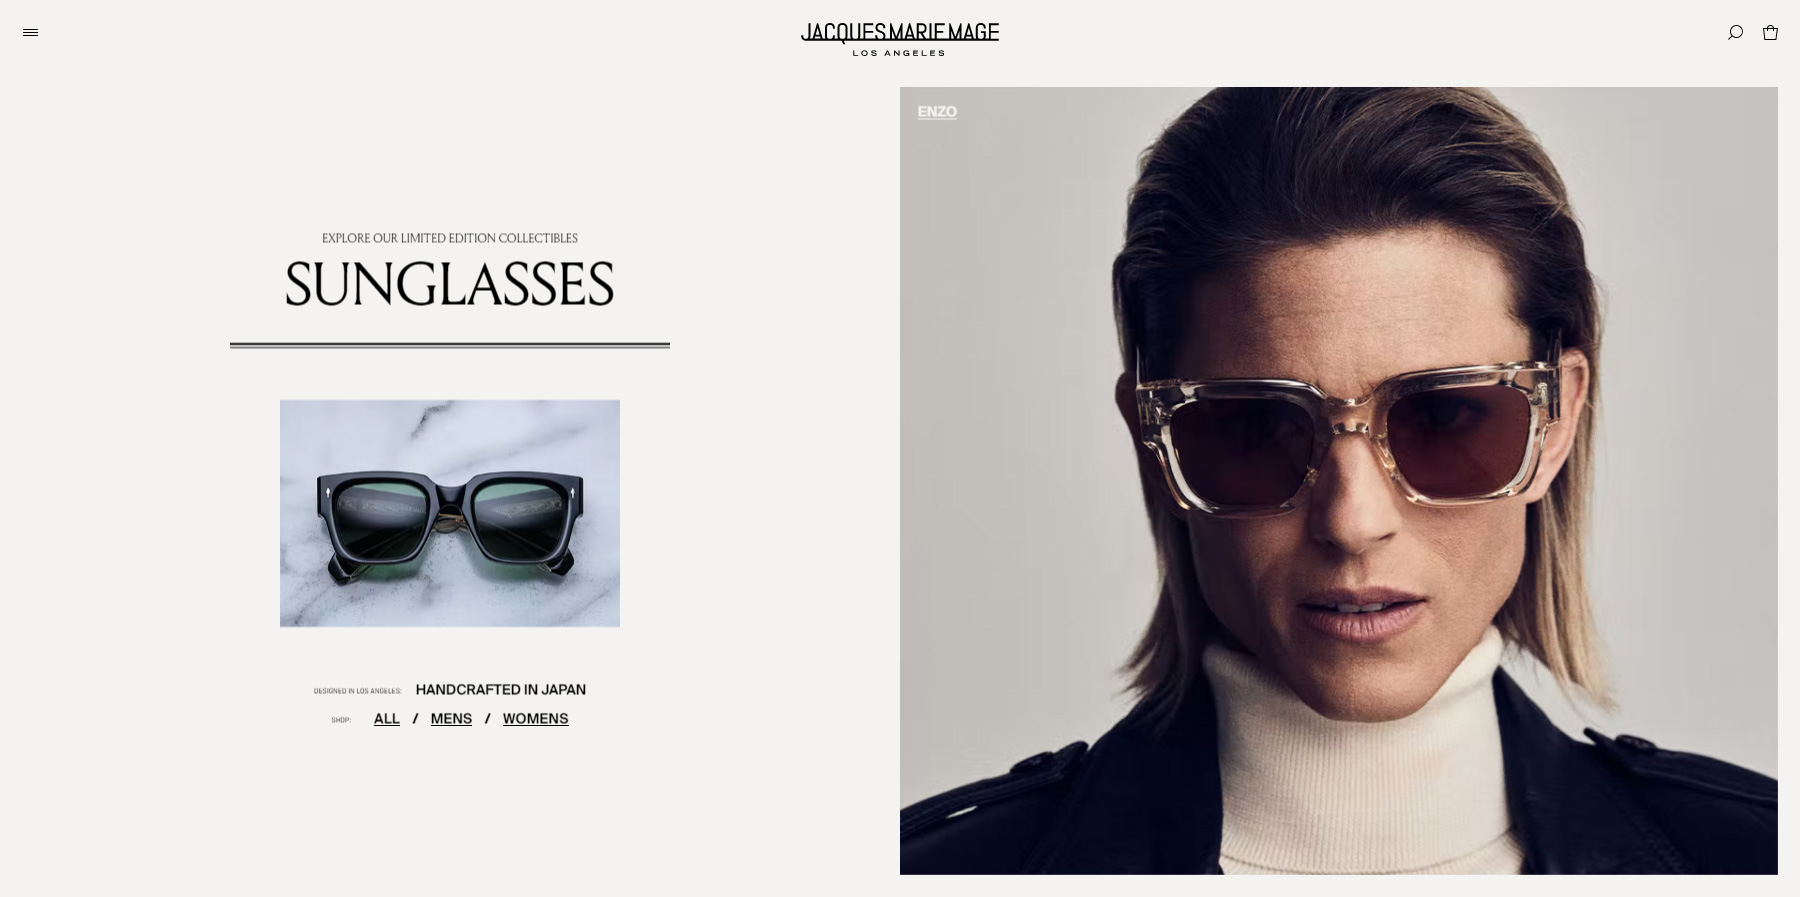 Jacques Marie Mage - Website of the Day